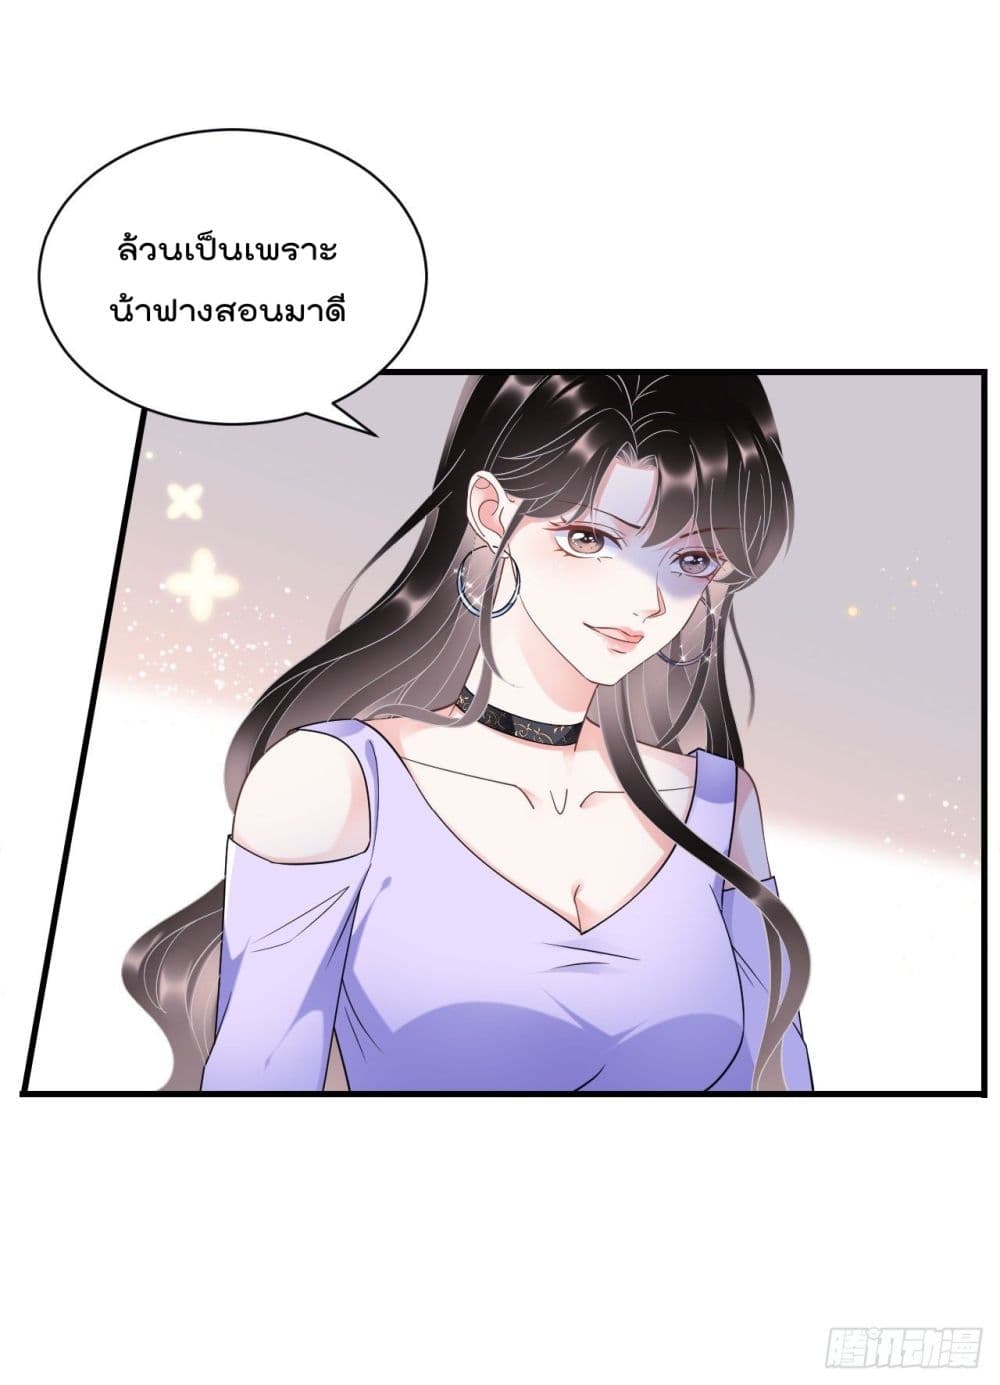 What Can the Eldest Lady Have คุณหนูใหญ่ ทำไมคุณร้ายอย่างนี้ 15-15